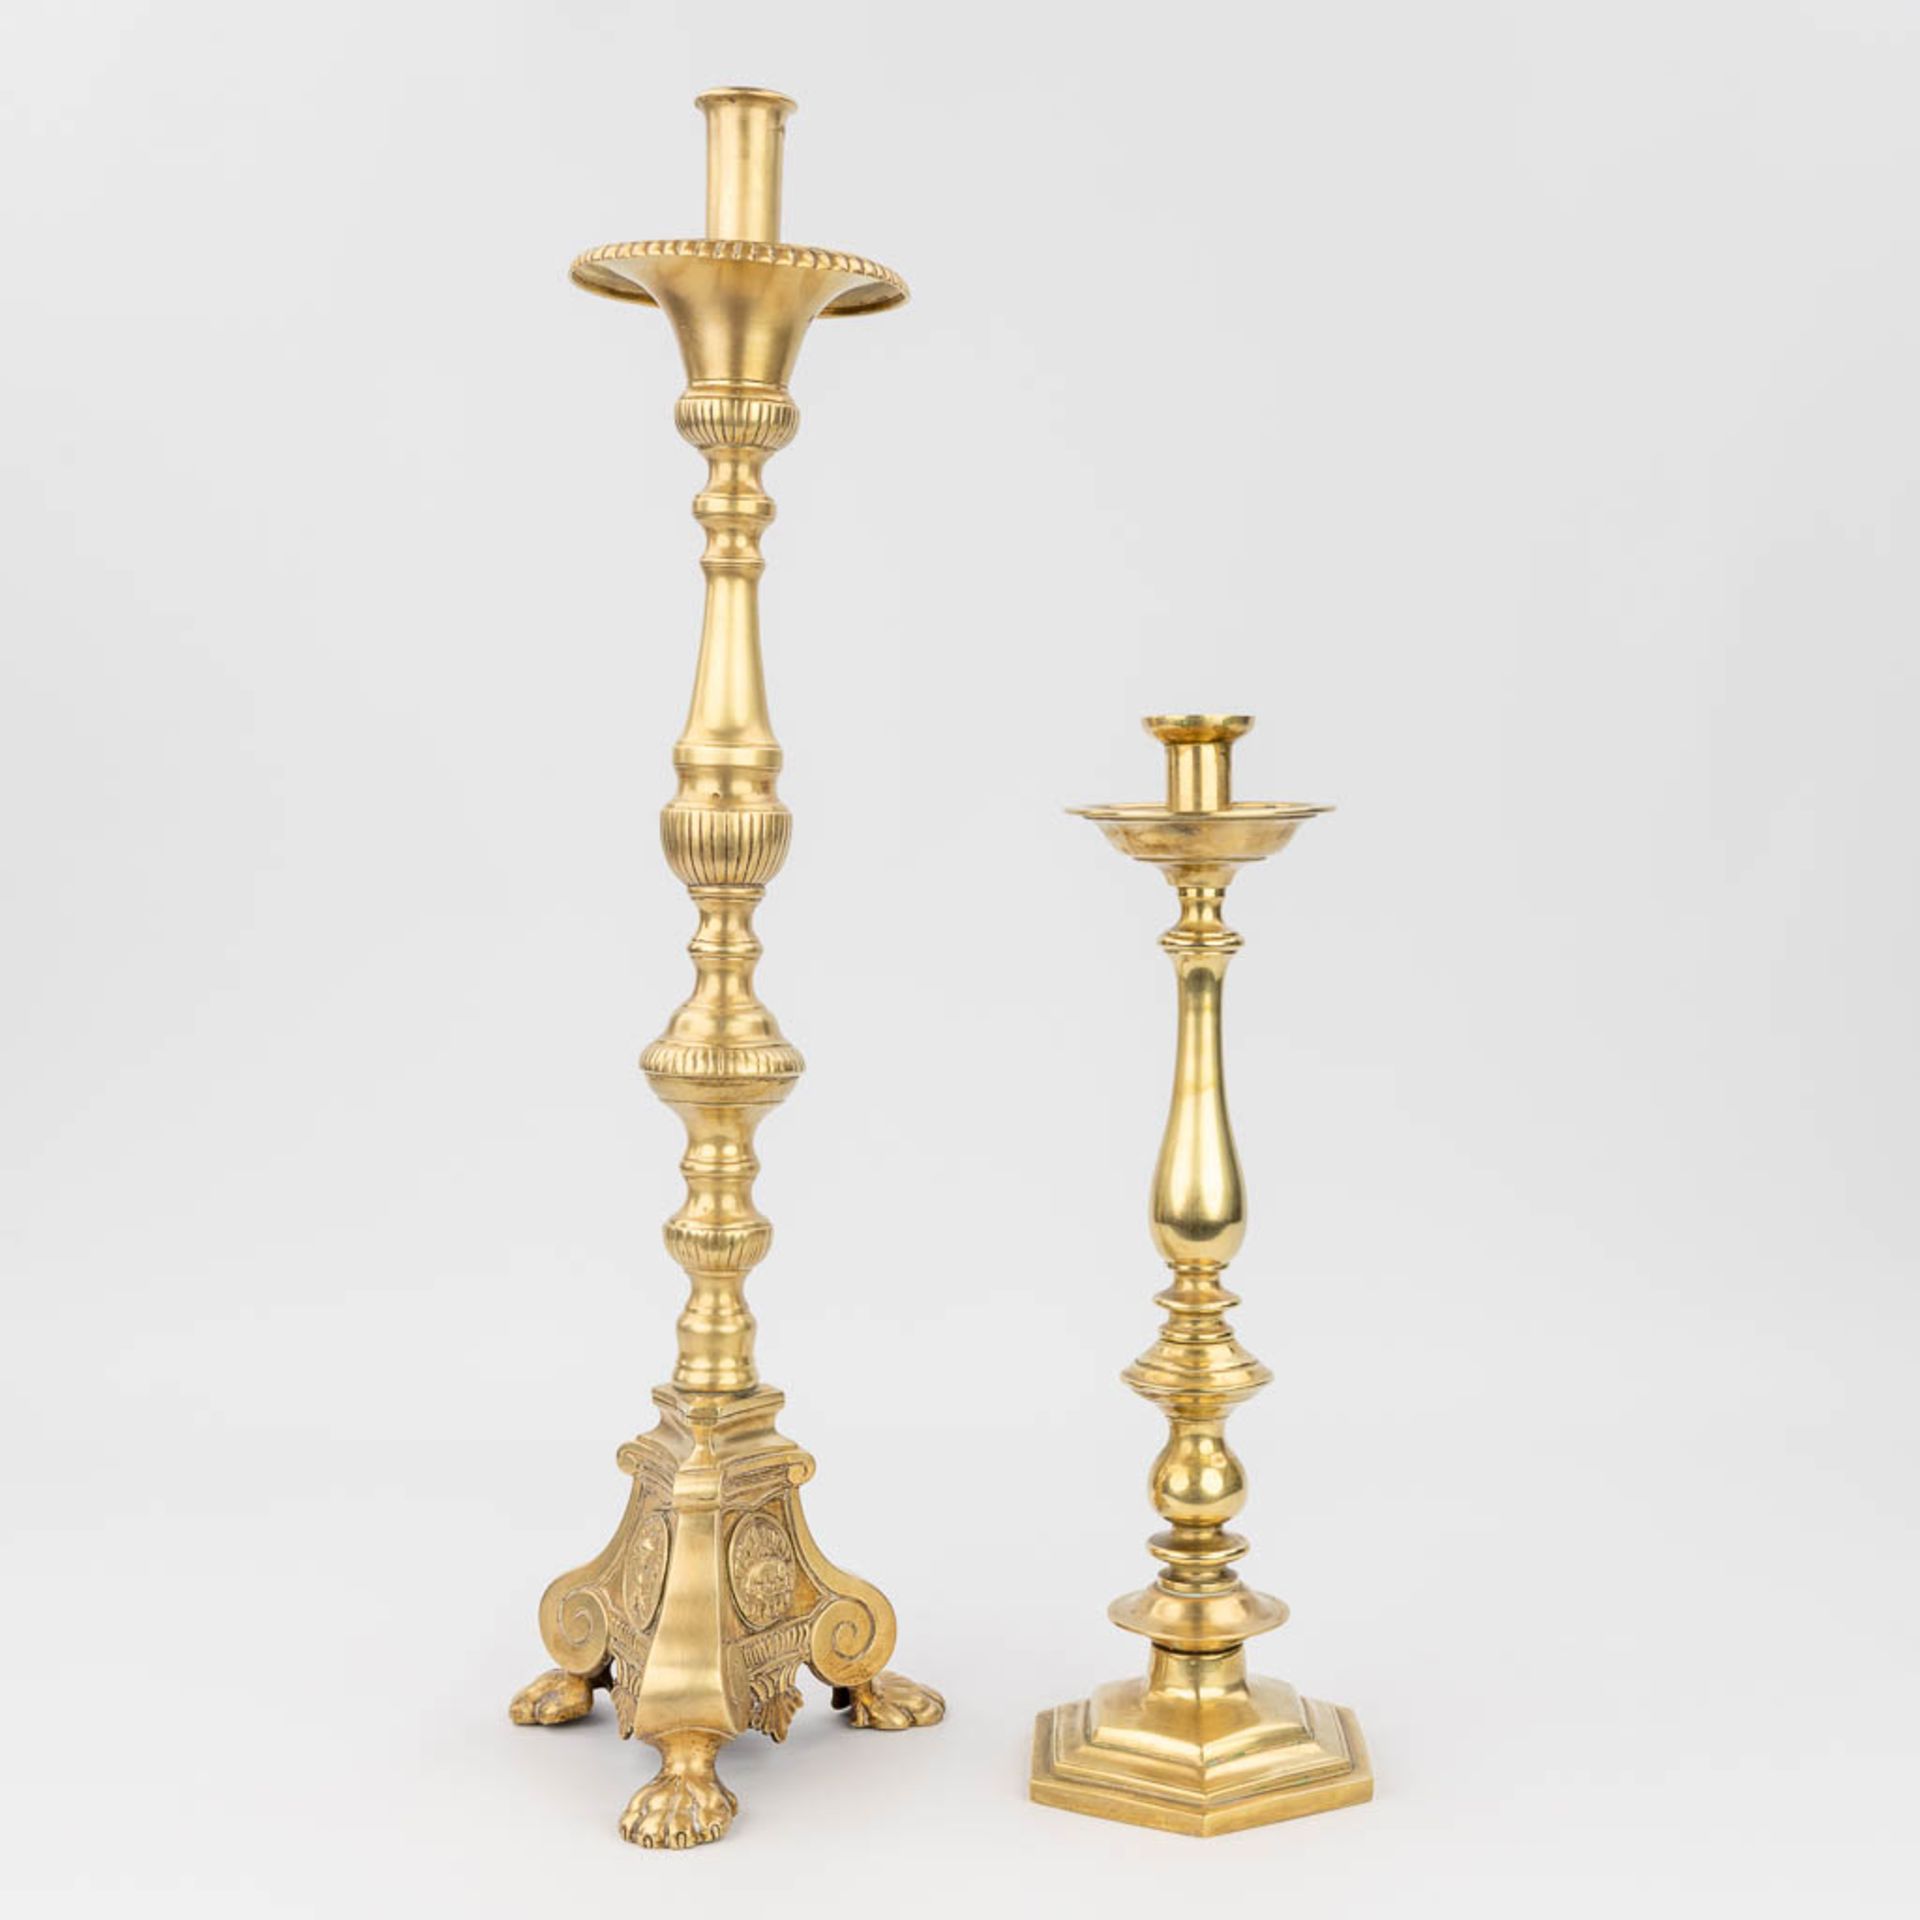 A collection of 2 candelabra made of polished bronze. (H:65 cm) - Image 8 of 14